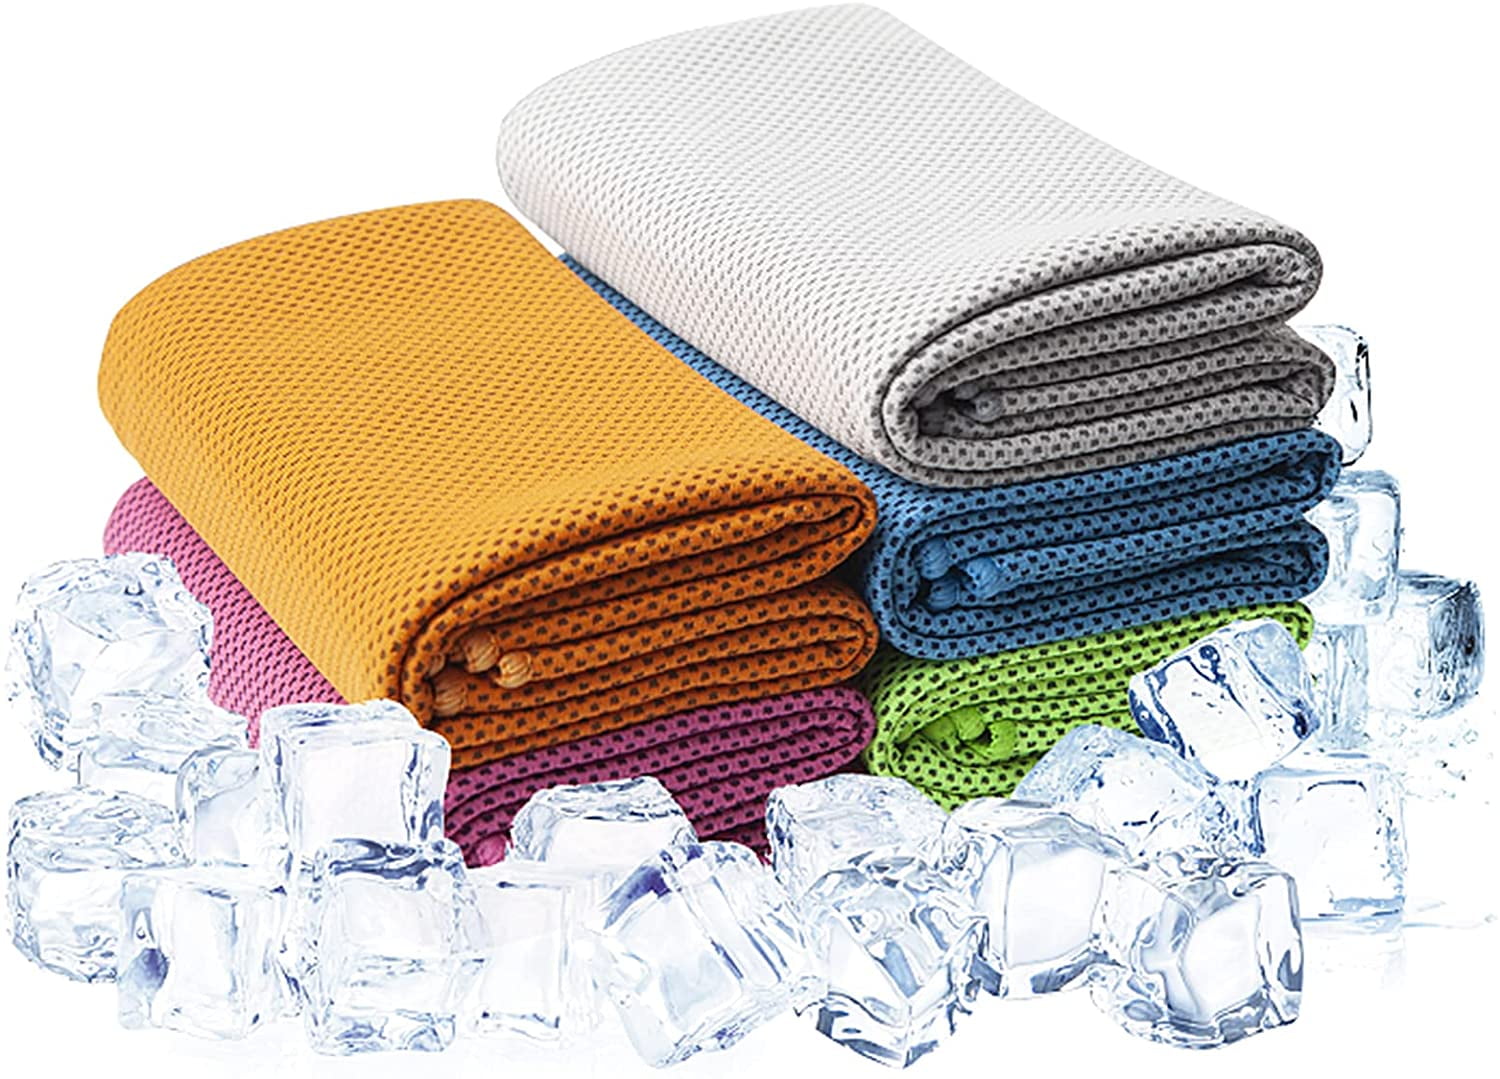 4 Packs Cooling Towel ,Ice Towel,Microfiber Towel,Soft Breathable Chilly Towel for Yoga,Sport,Gym,Workout,Camping,Fitness,Running,Workout&More Activities 40x 12 